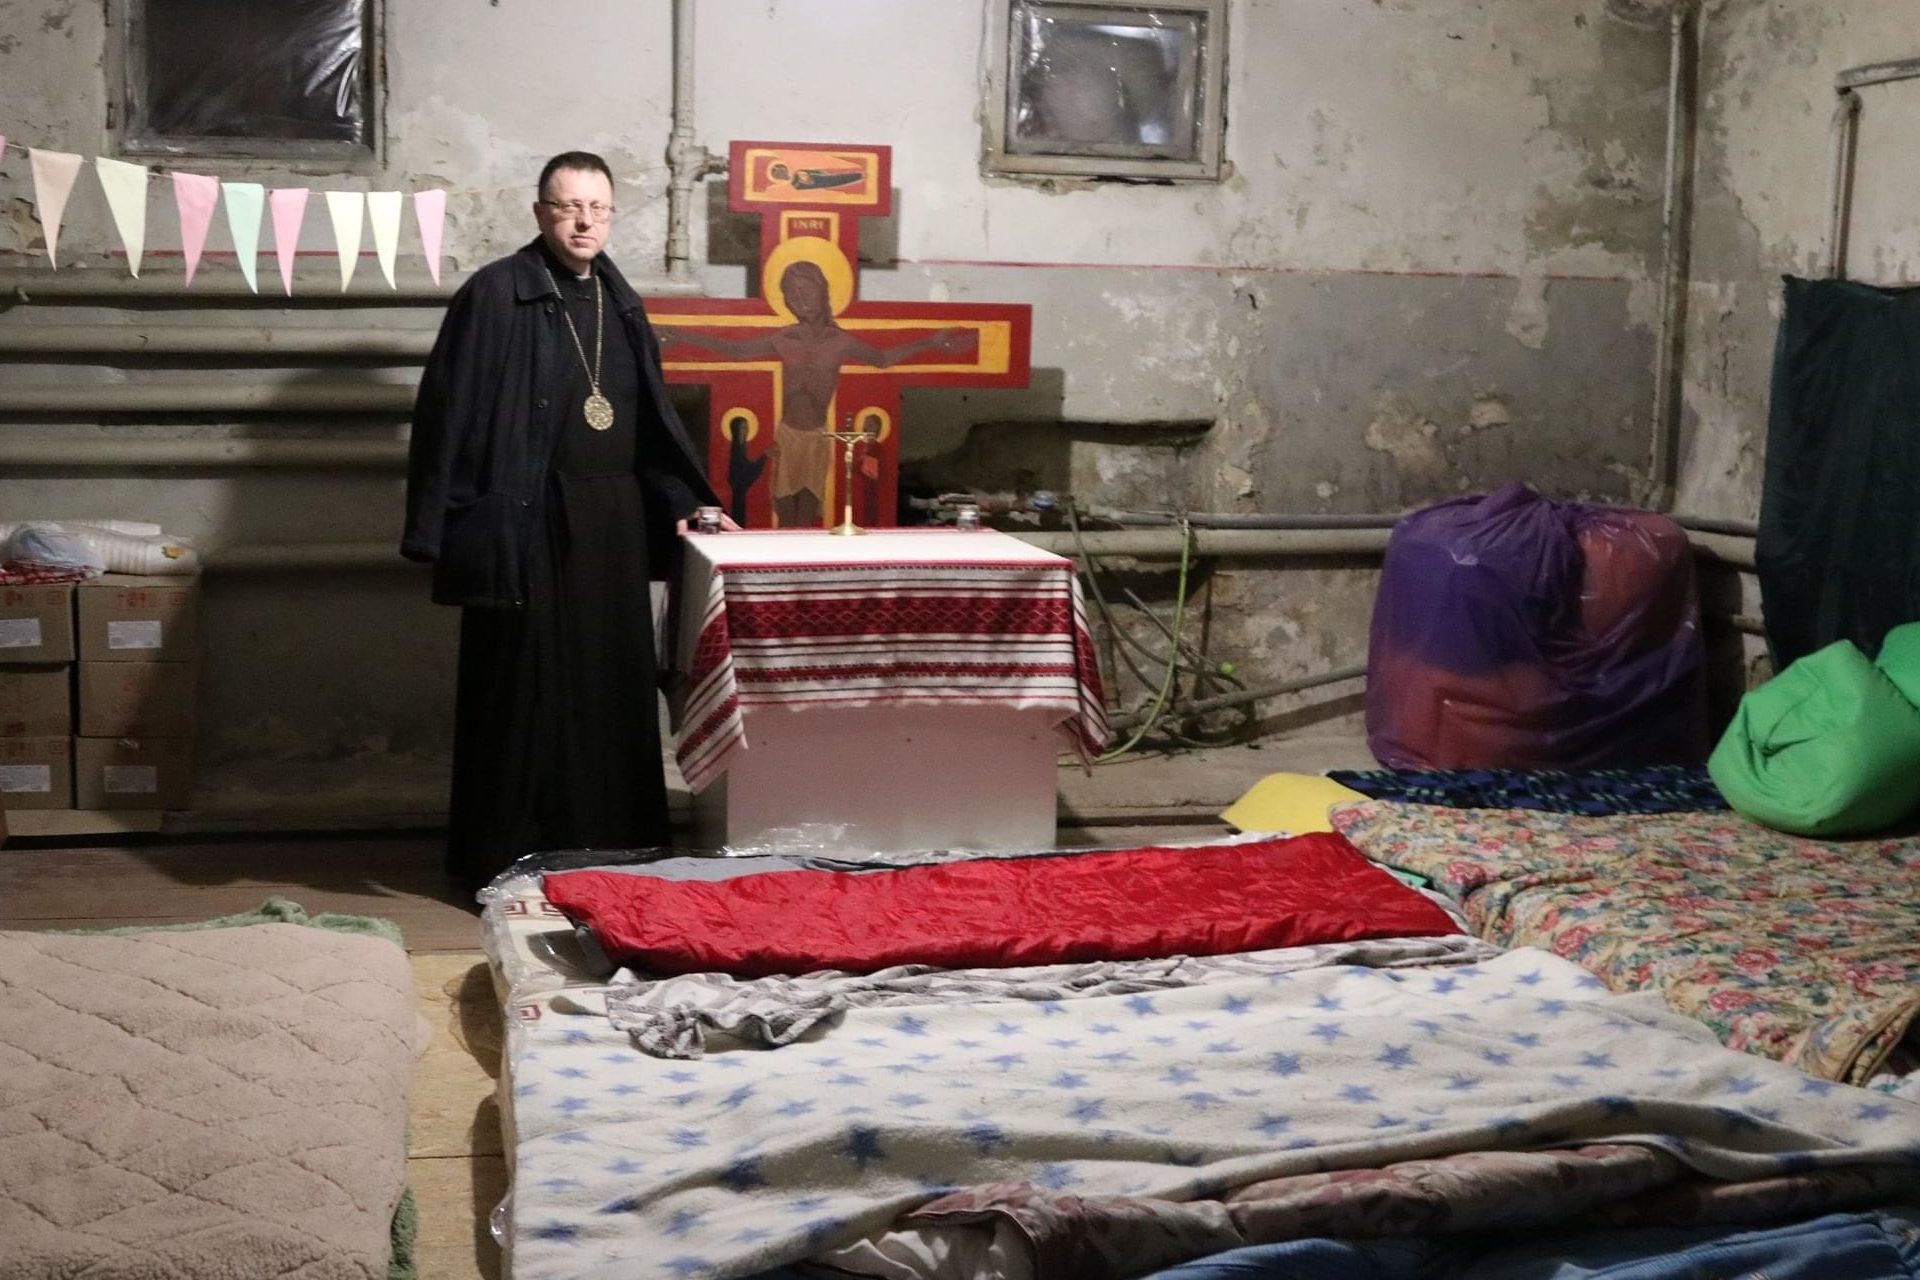 Auxiliary Bishop Volodymyr Hrutsa in the chapel of an underground shelter.